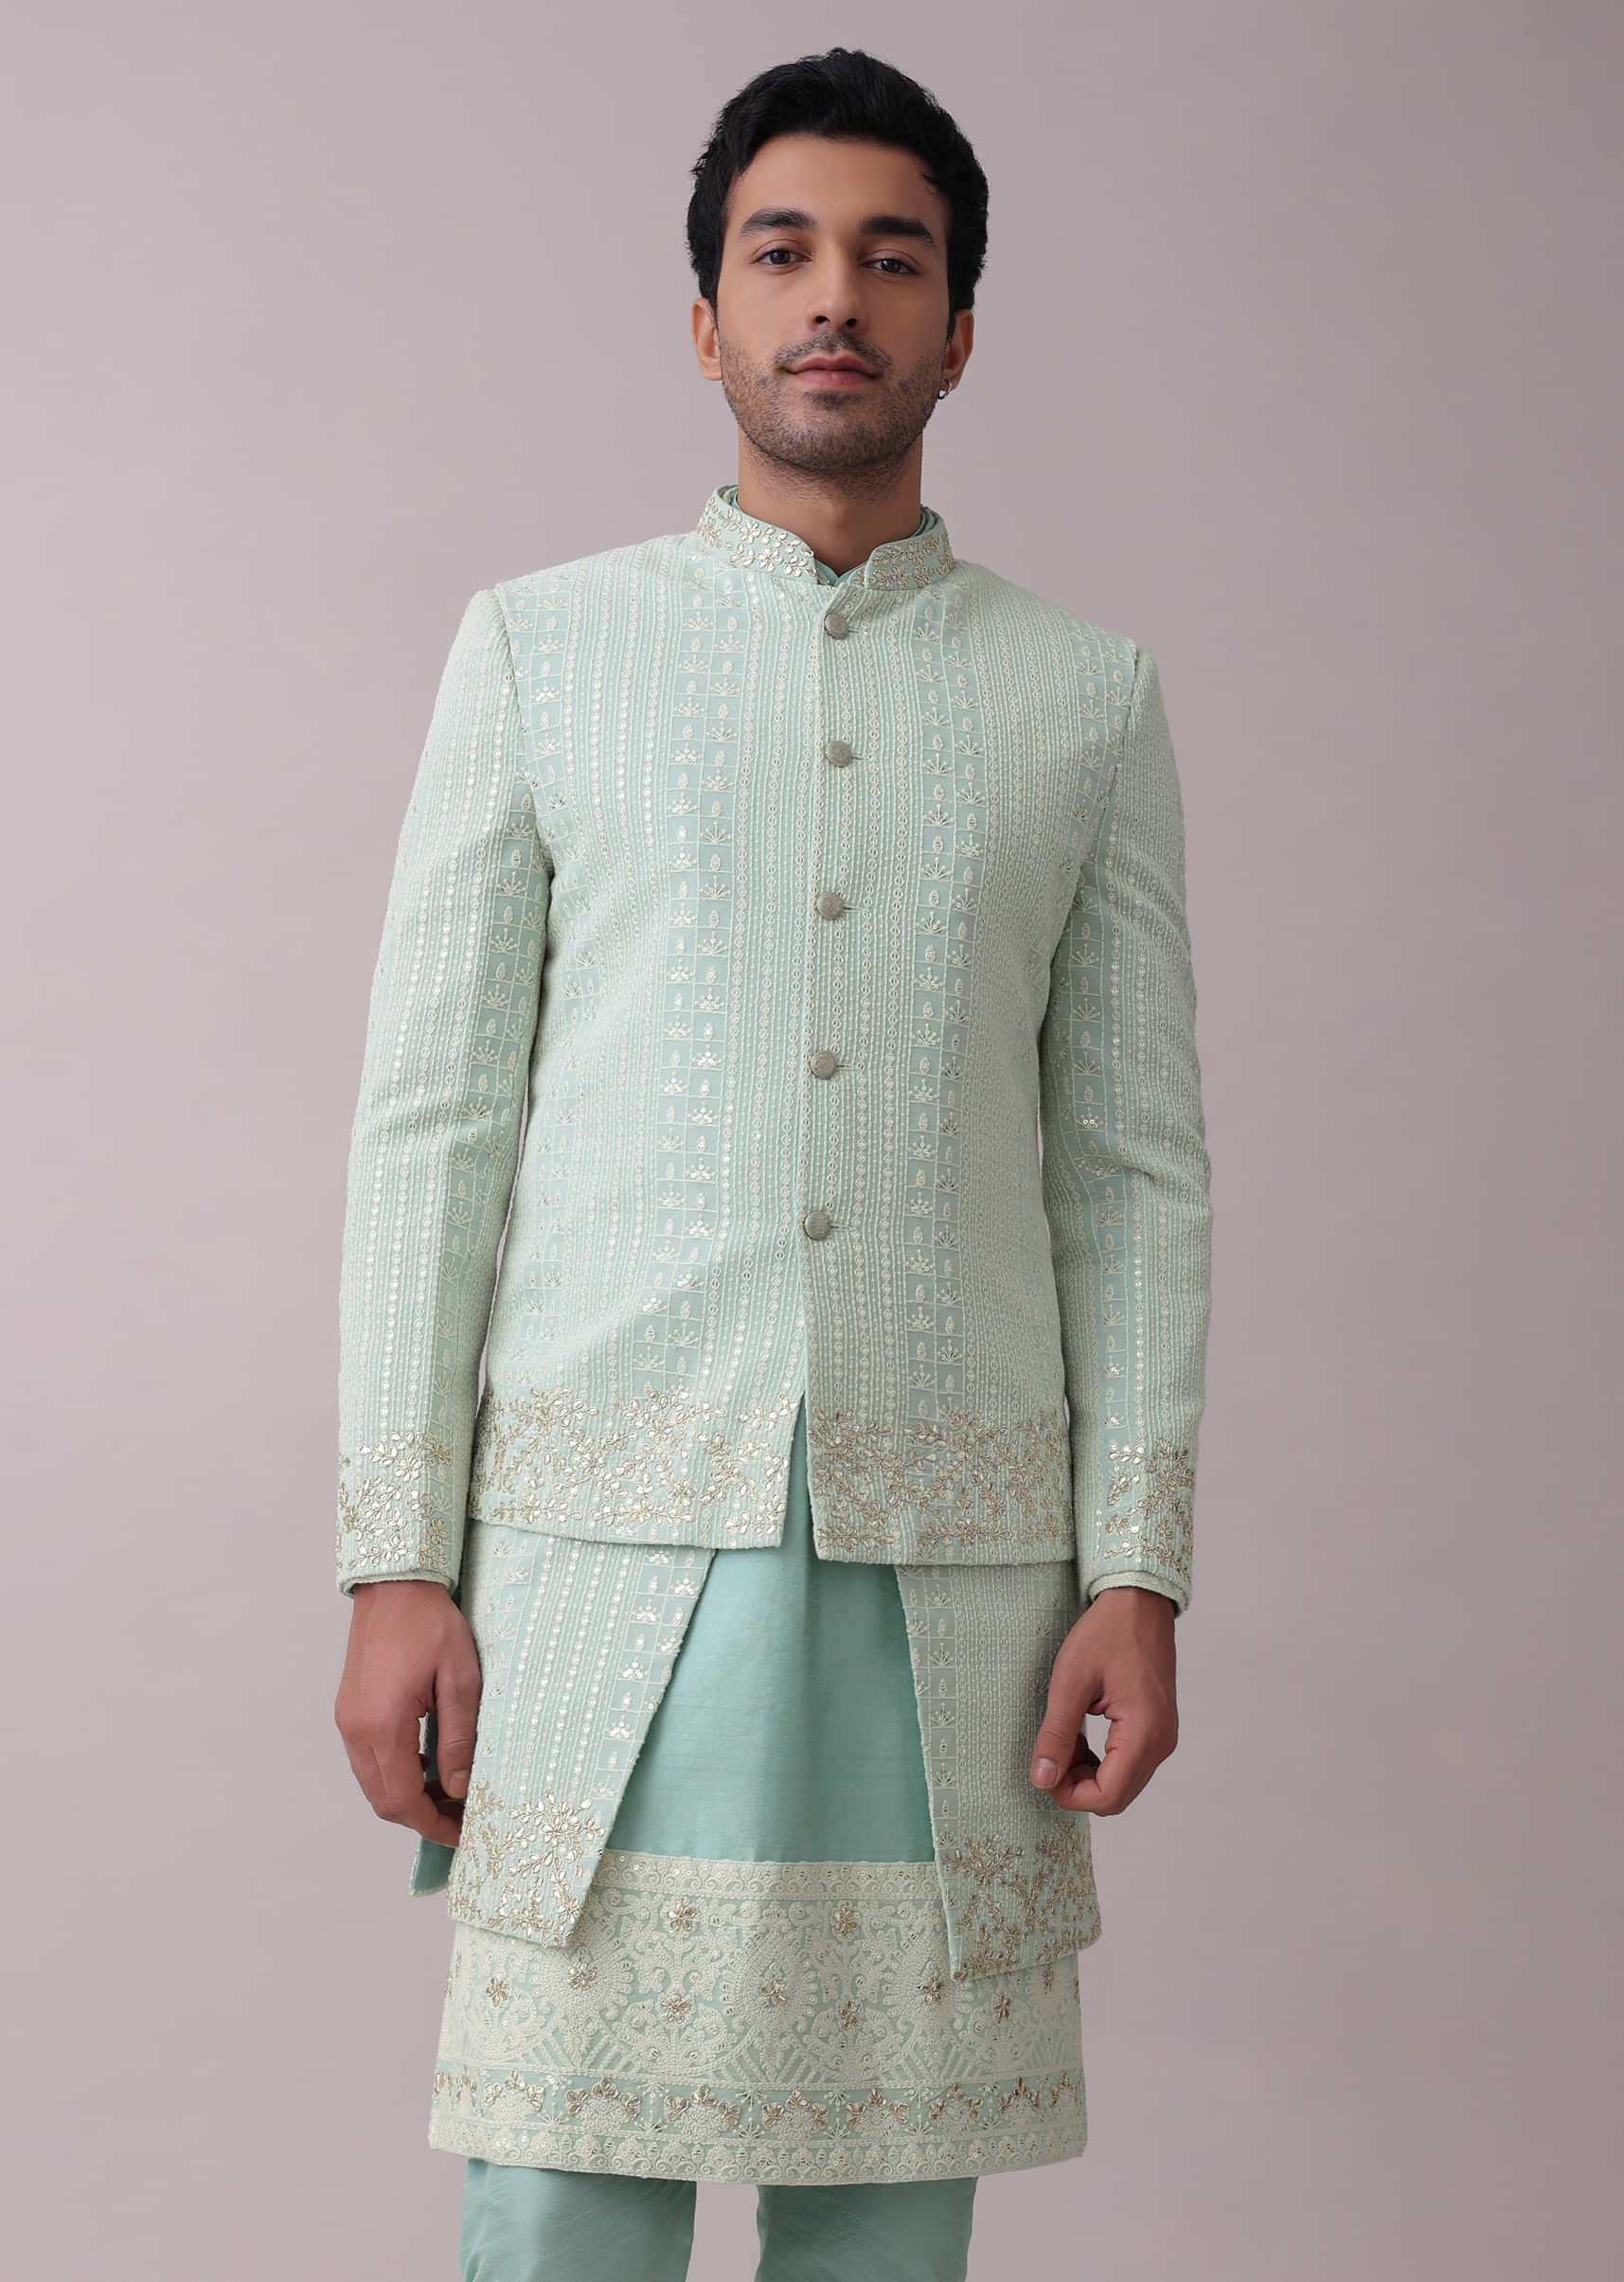 Indian Wedding Clothing for Men  Mens Ethnic Wear, Business Suits